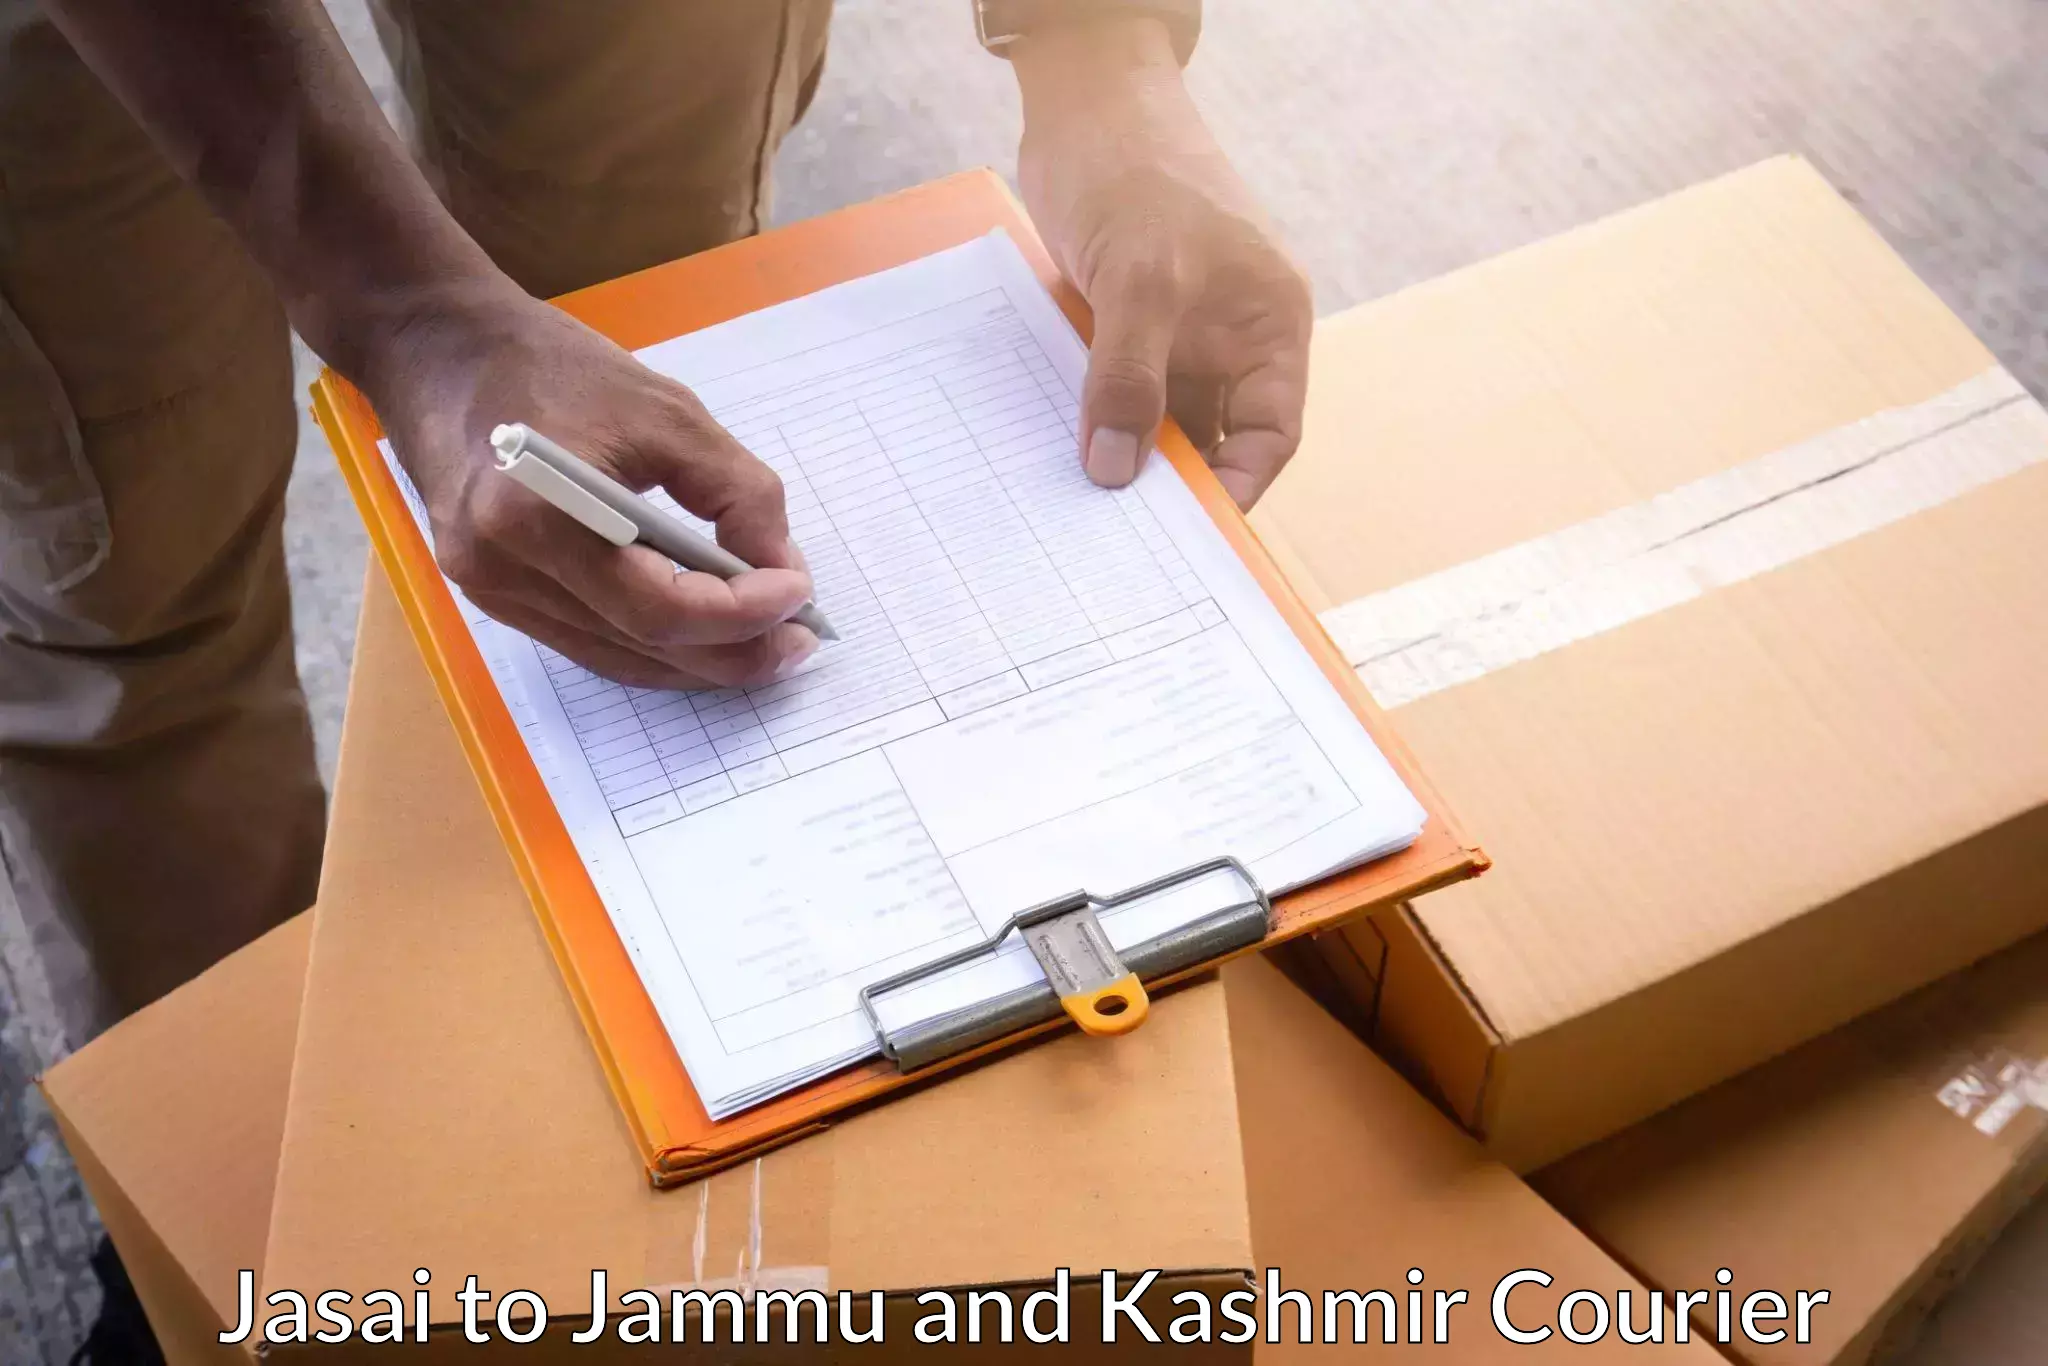 Optimized delivery routes Jasai to Jammu and Kashmir